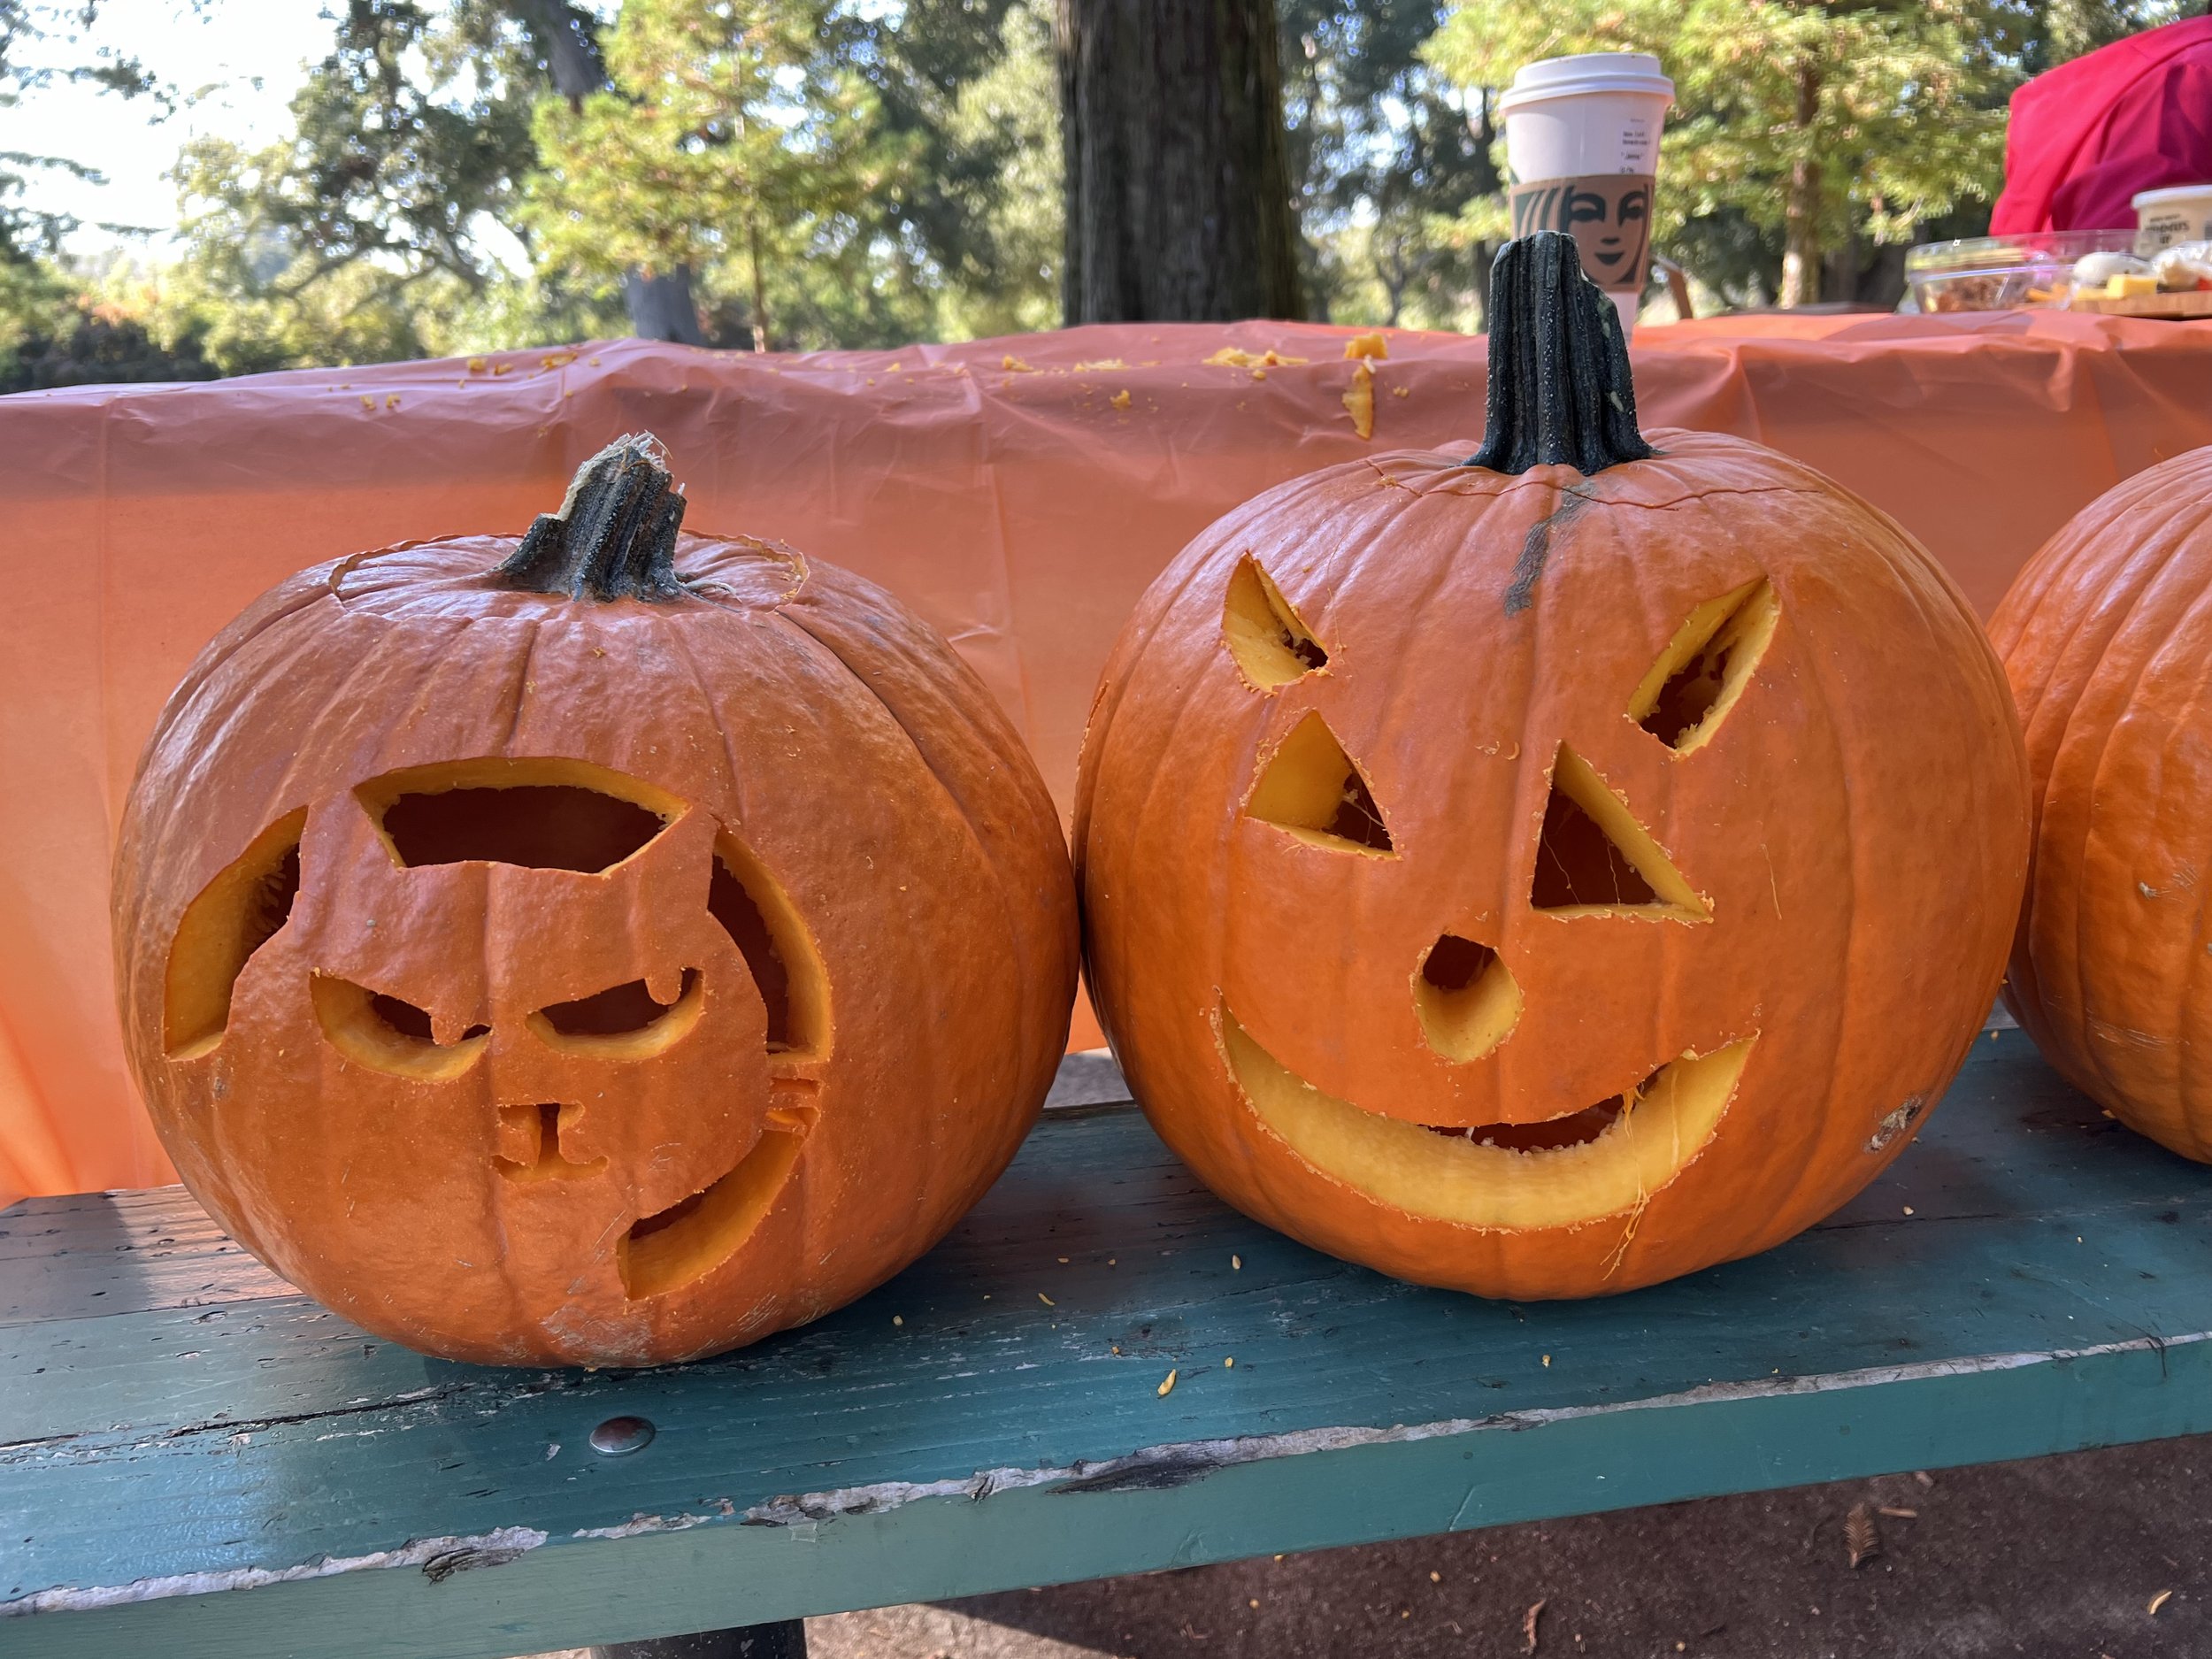 Group Event: Pumpkin Spice Lattes and Pumpkin Carving